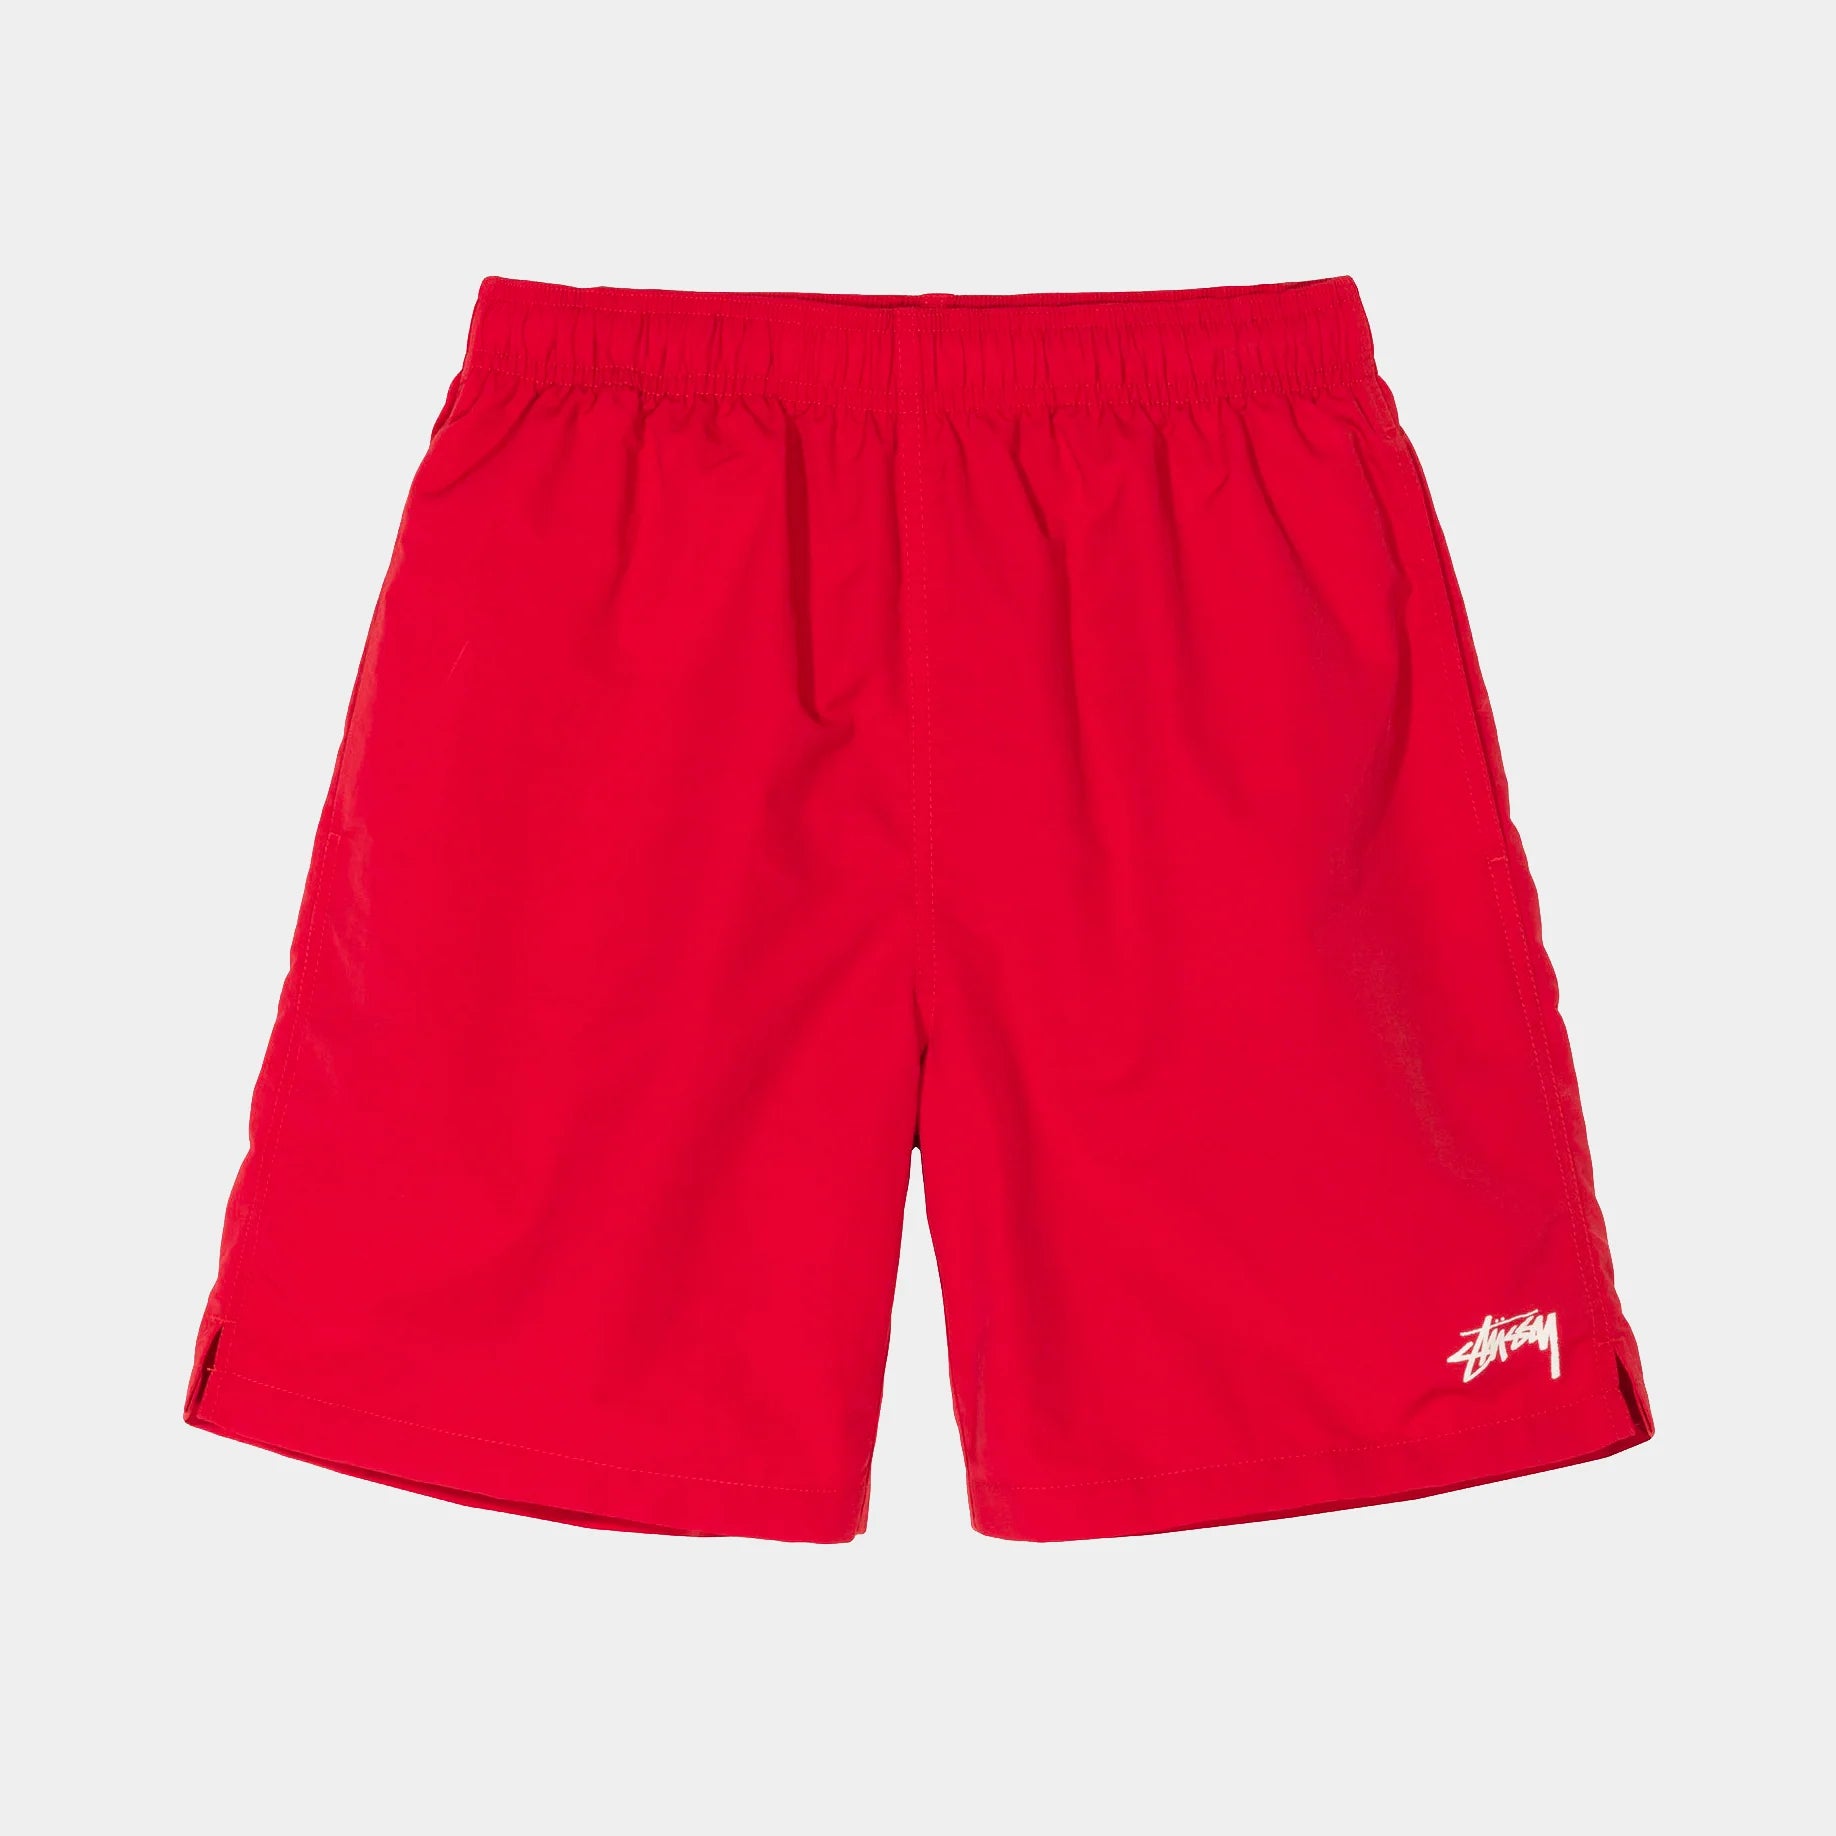 Stock Water Short Brite Red